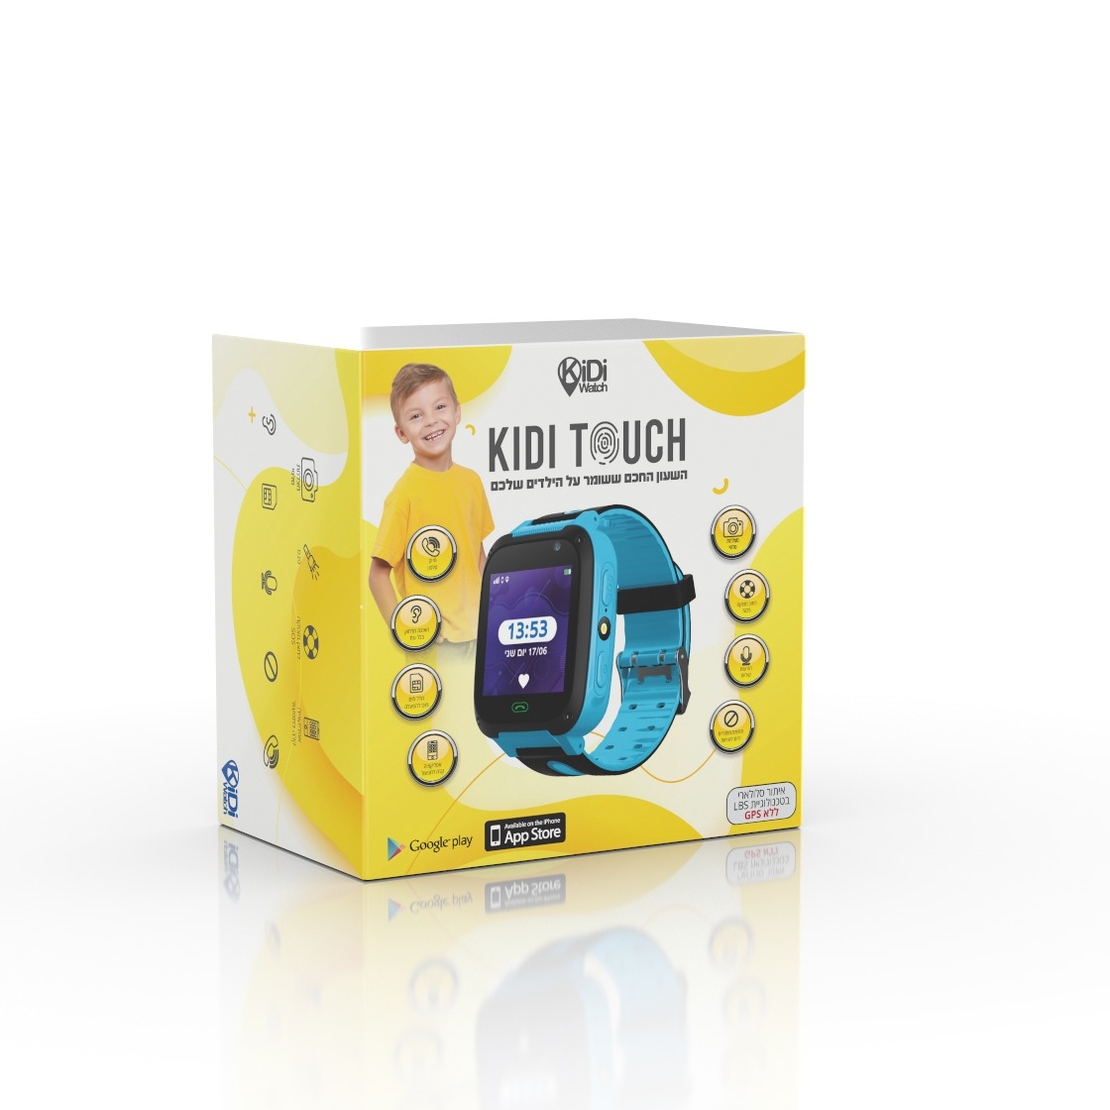 KIDI TOUCH